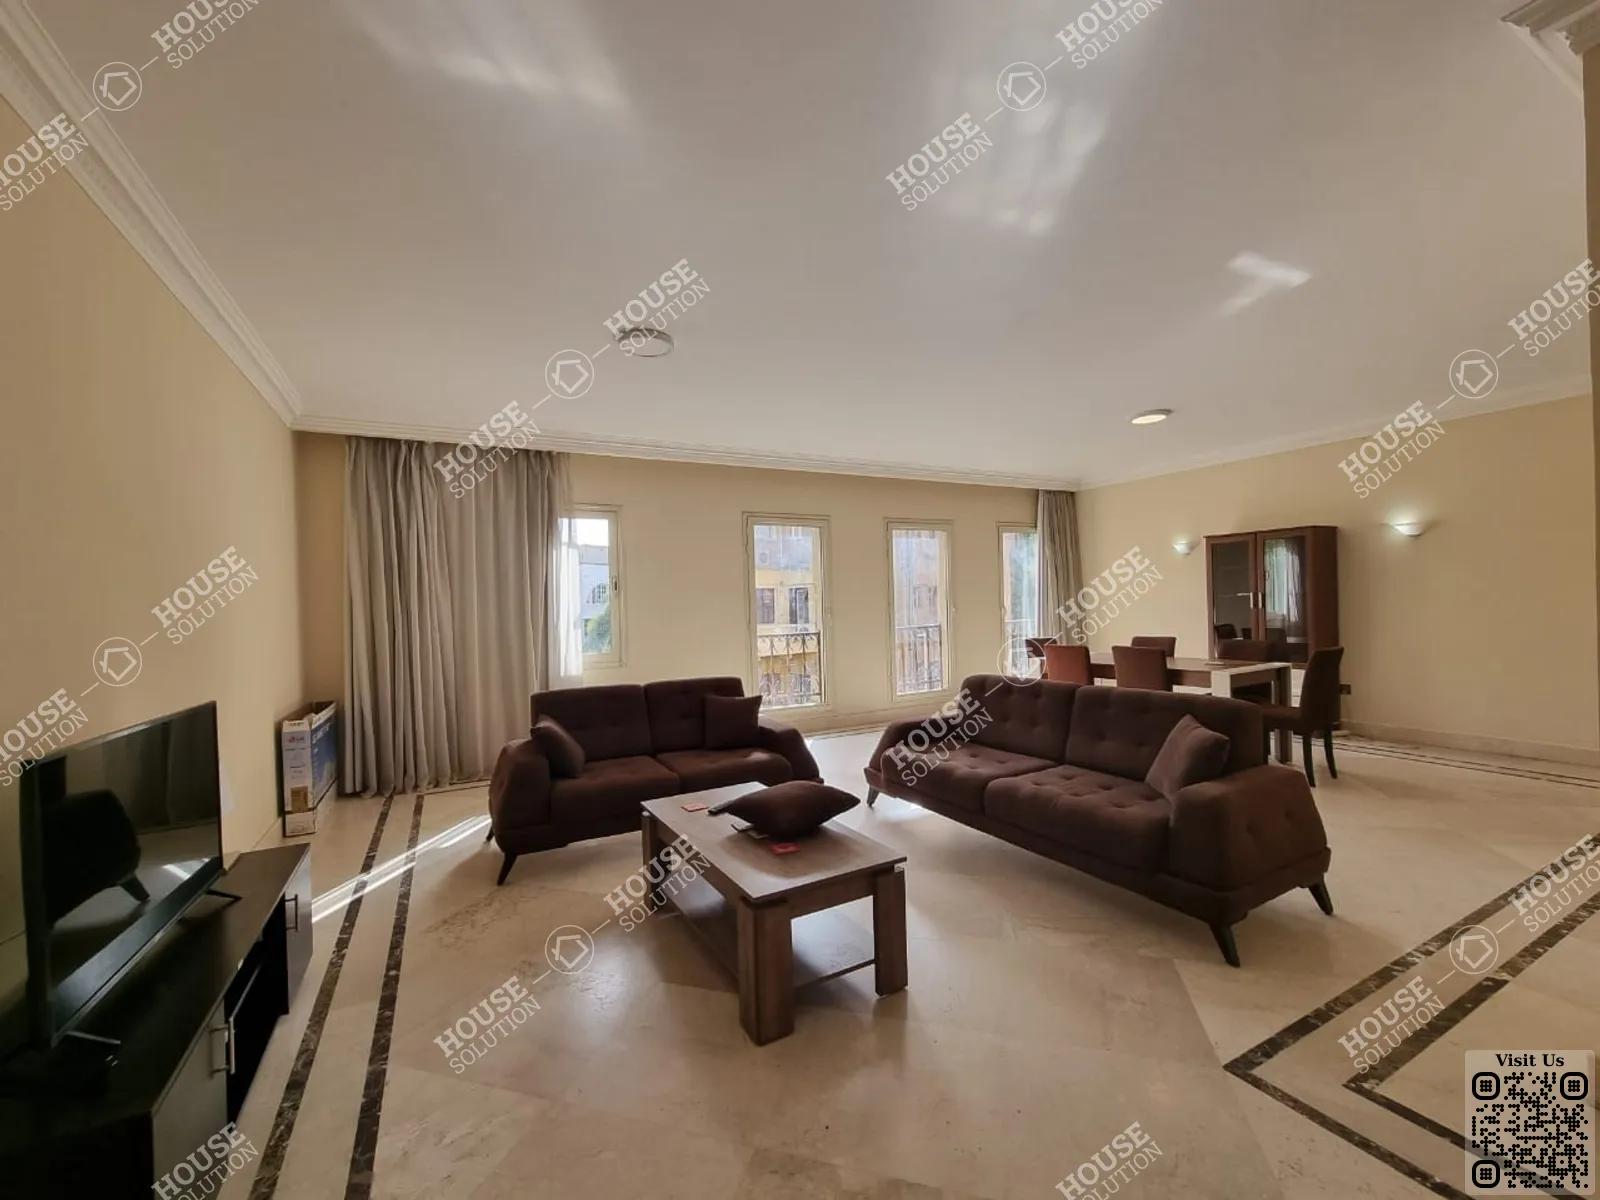 RECEPTION  @ Apartments For Rent In Maadi Maadi Sarayat Area: 280 m² consists of 3 Bedrooms 3 Bathrooms Modern furnished 5 stars #5235-0